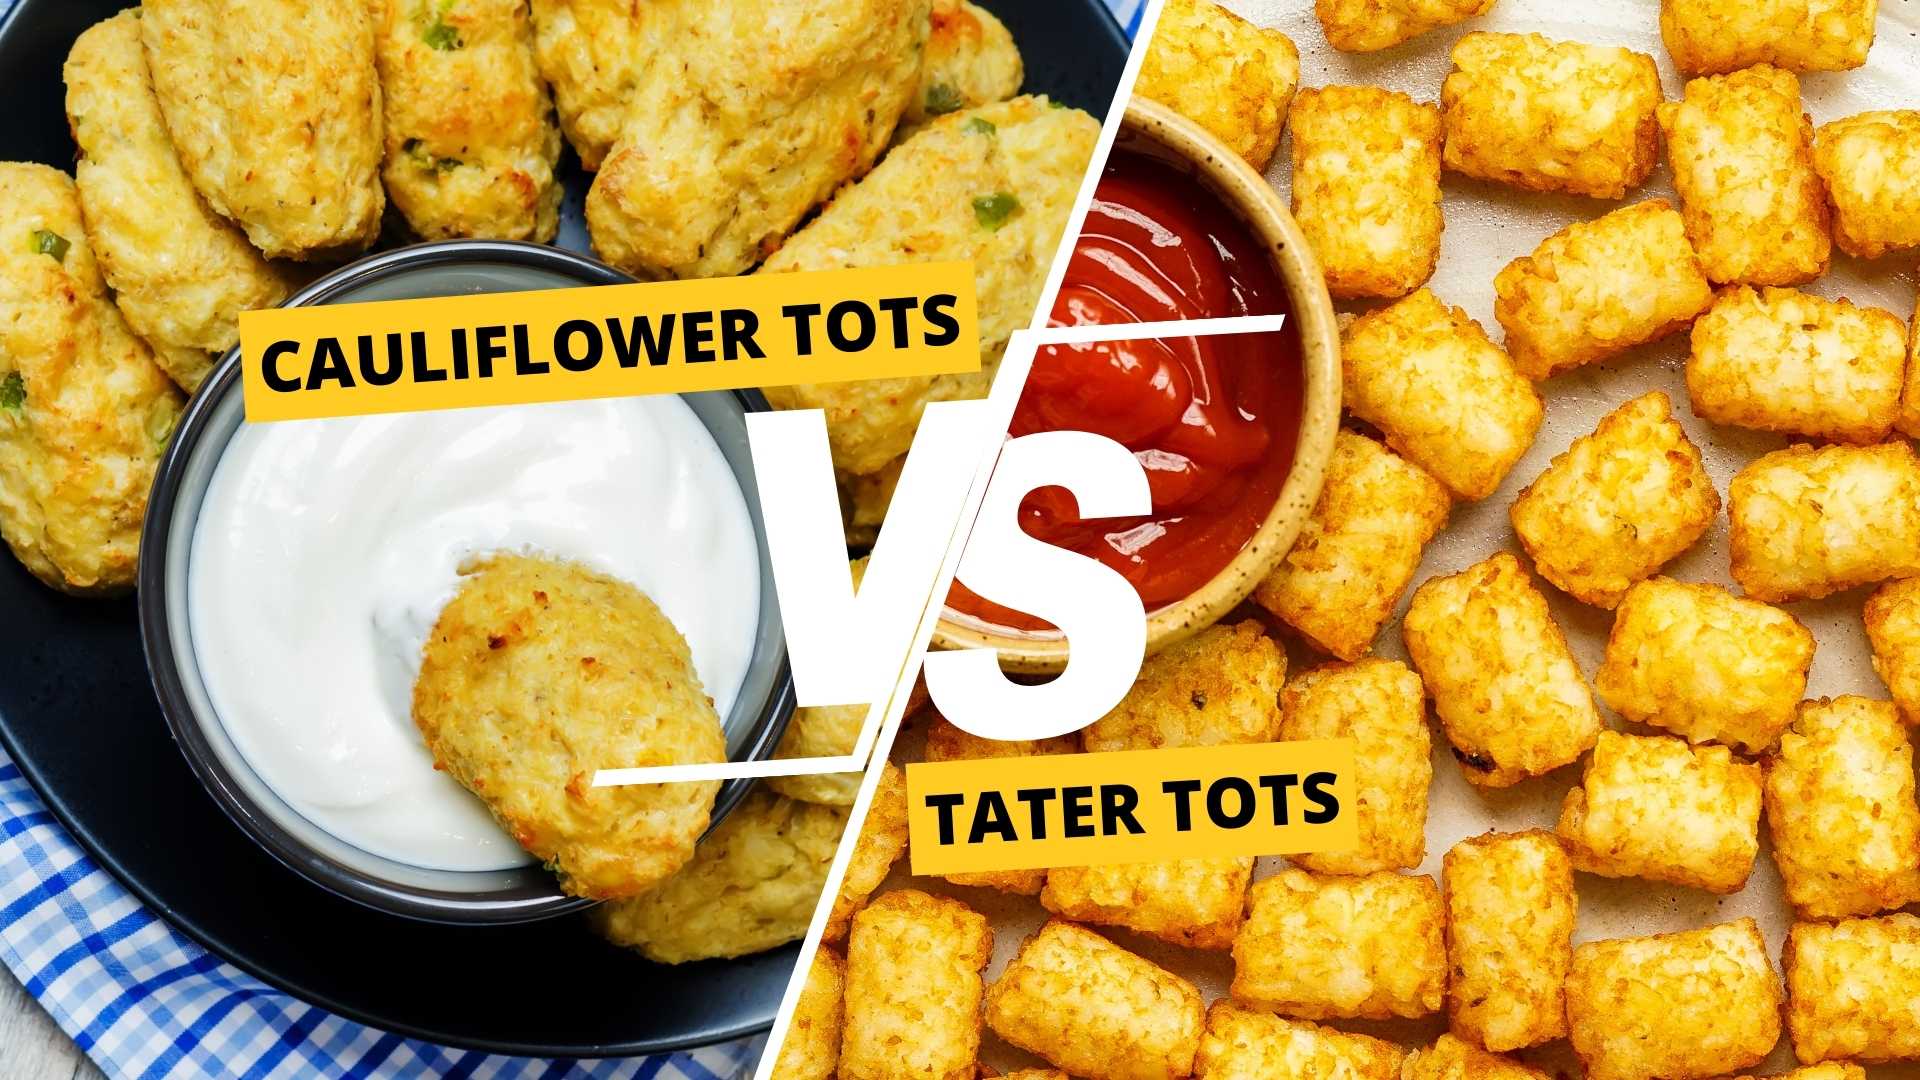 Cauliflower Tots vs Tater Tots: Which One Comes Out on Top?